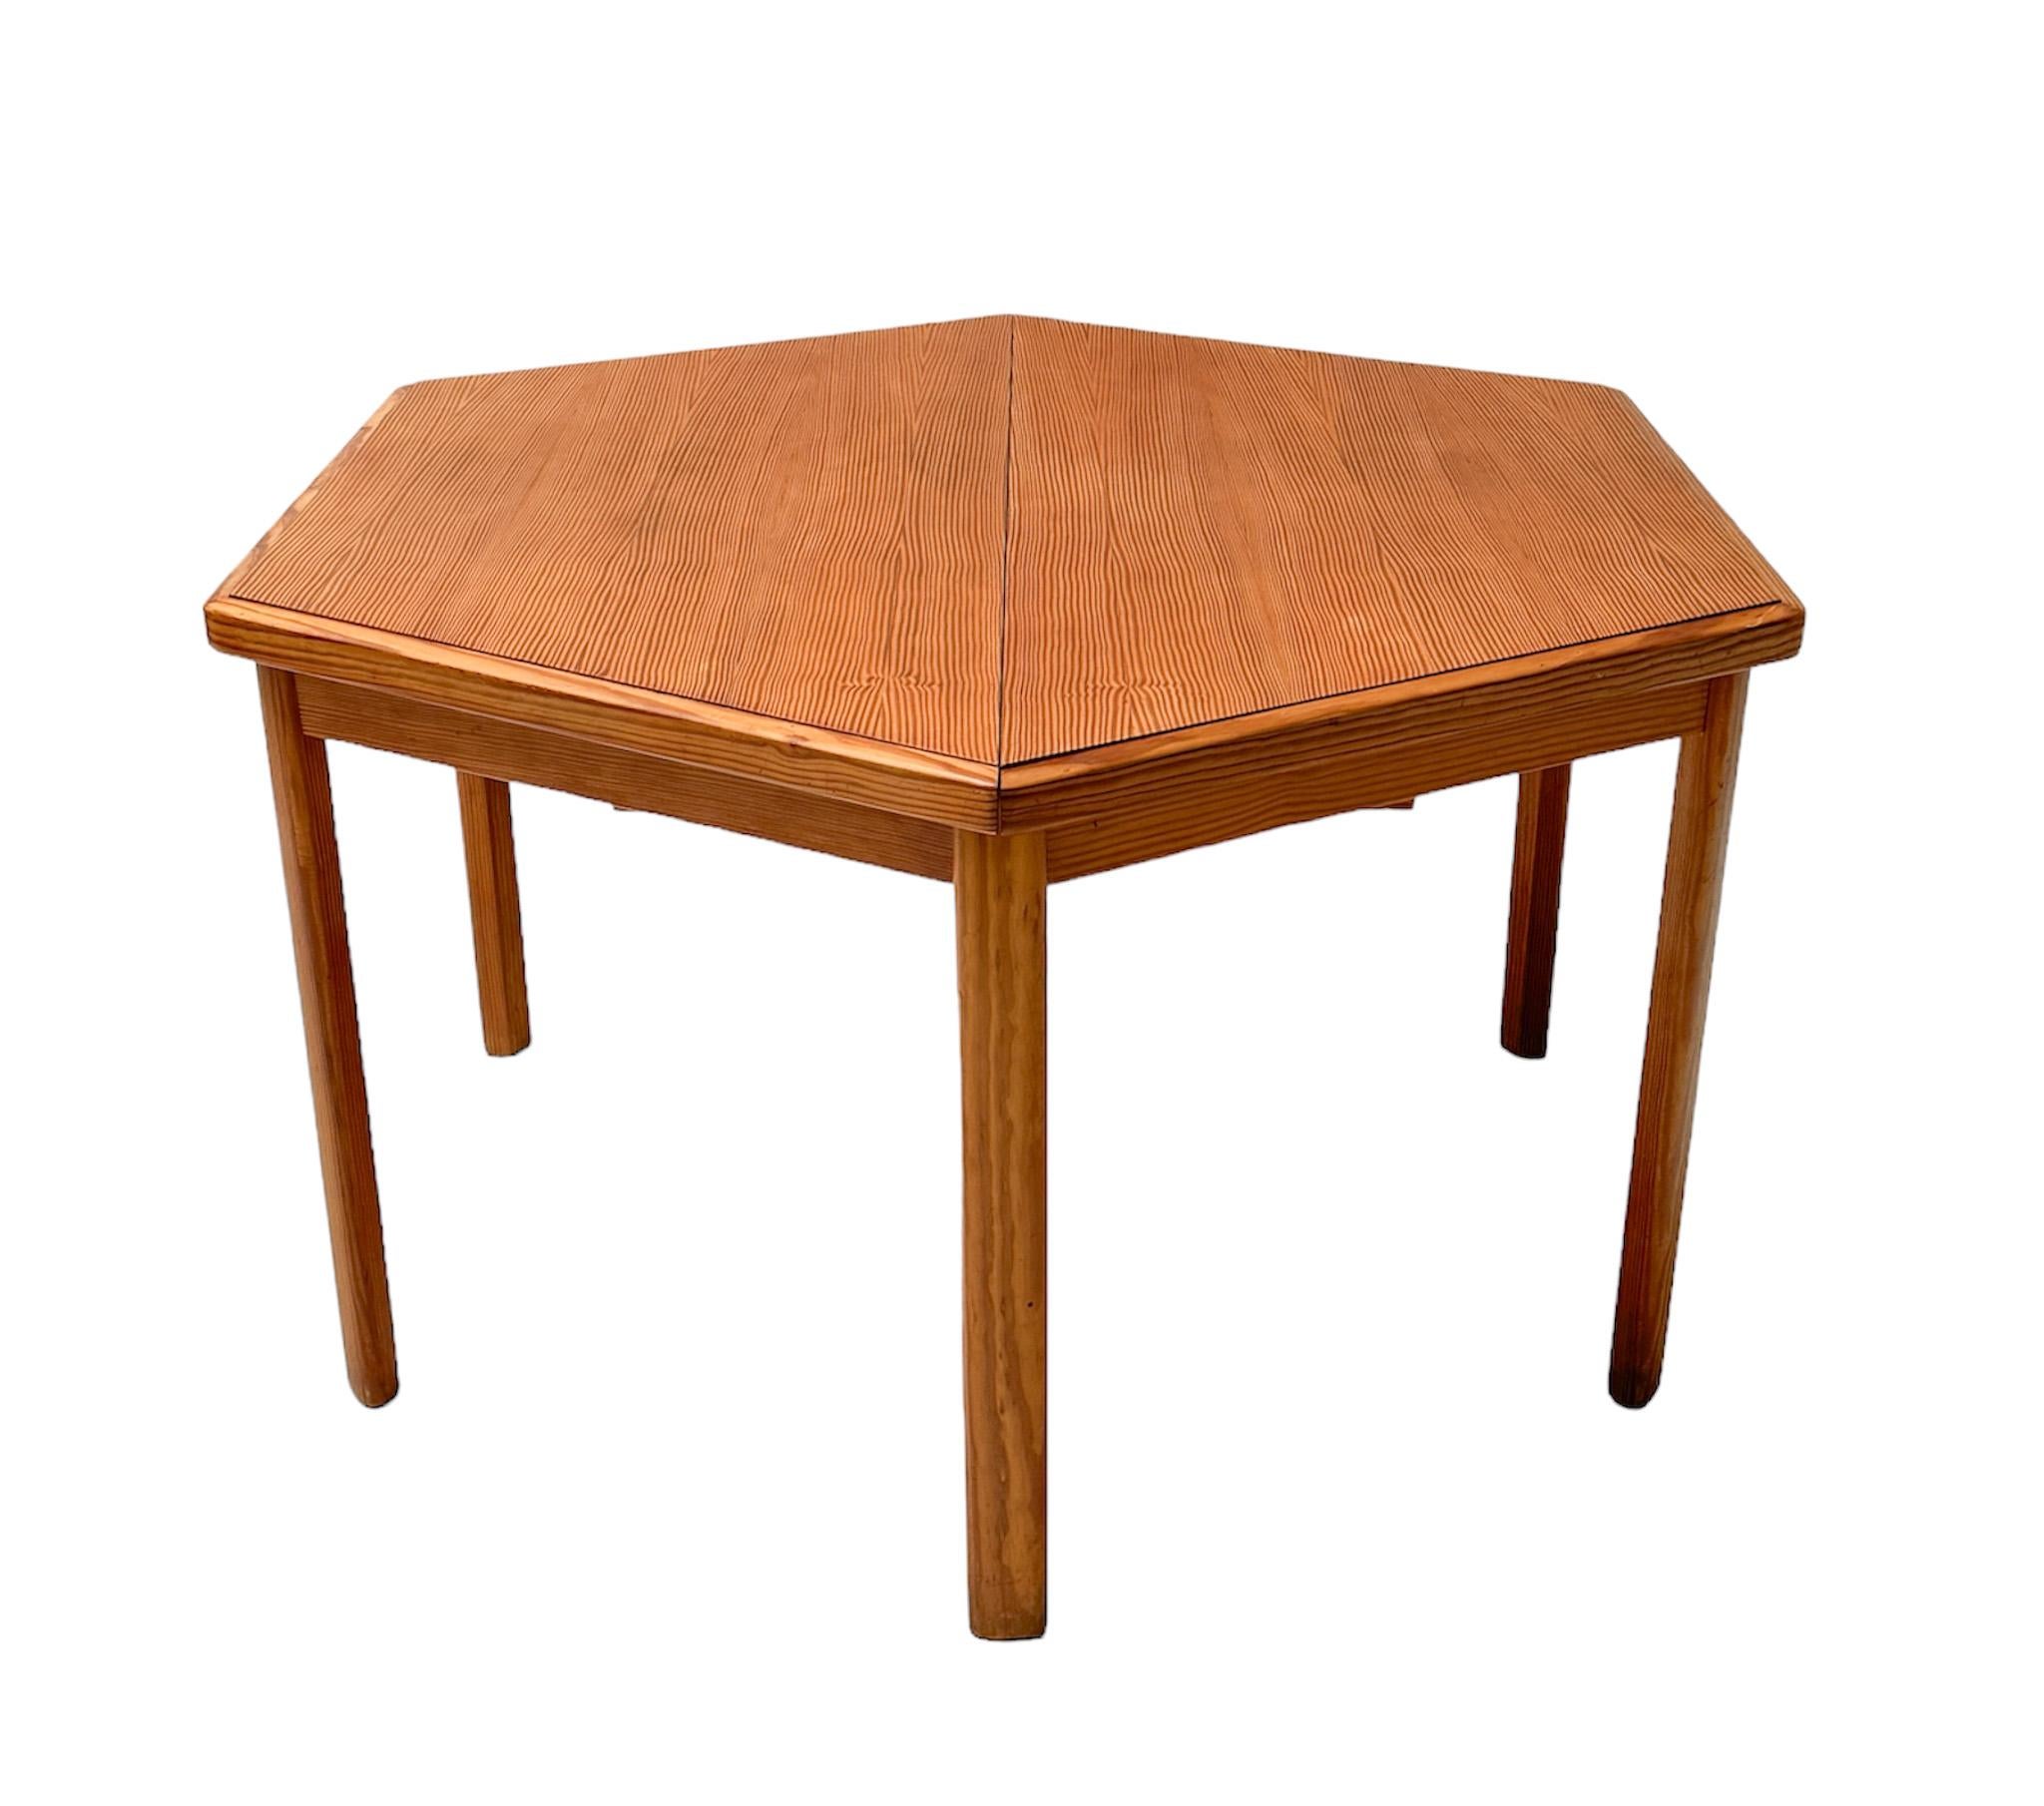 French Pine Mid-Century Modern Extendable Dining Room Table, 1970s For Sale 5